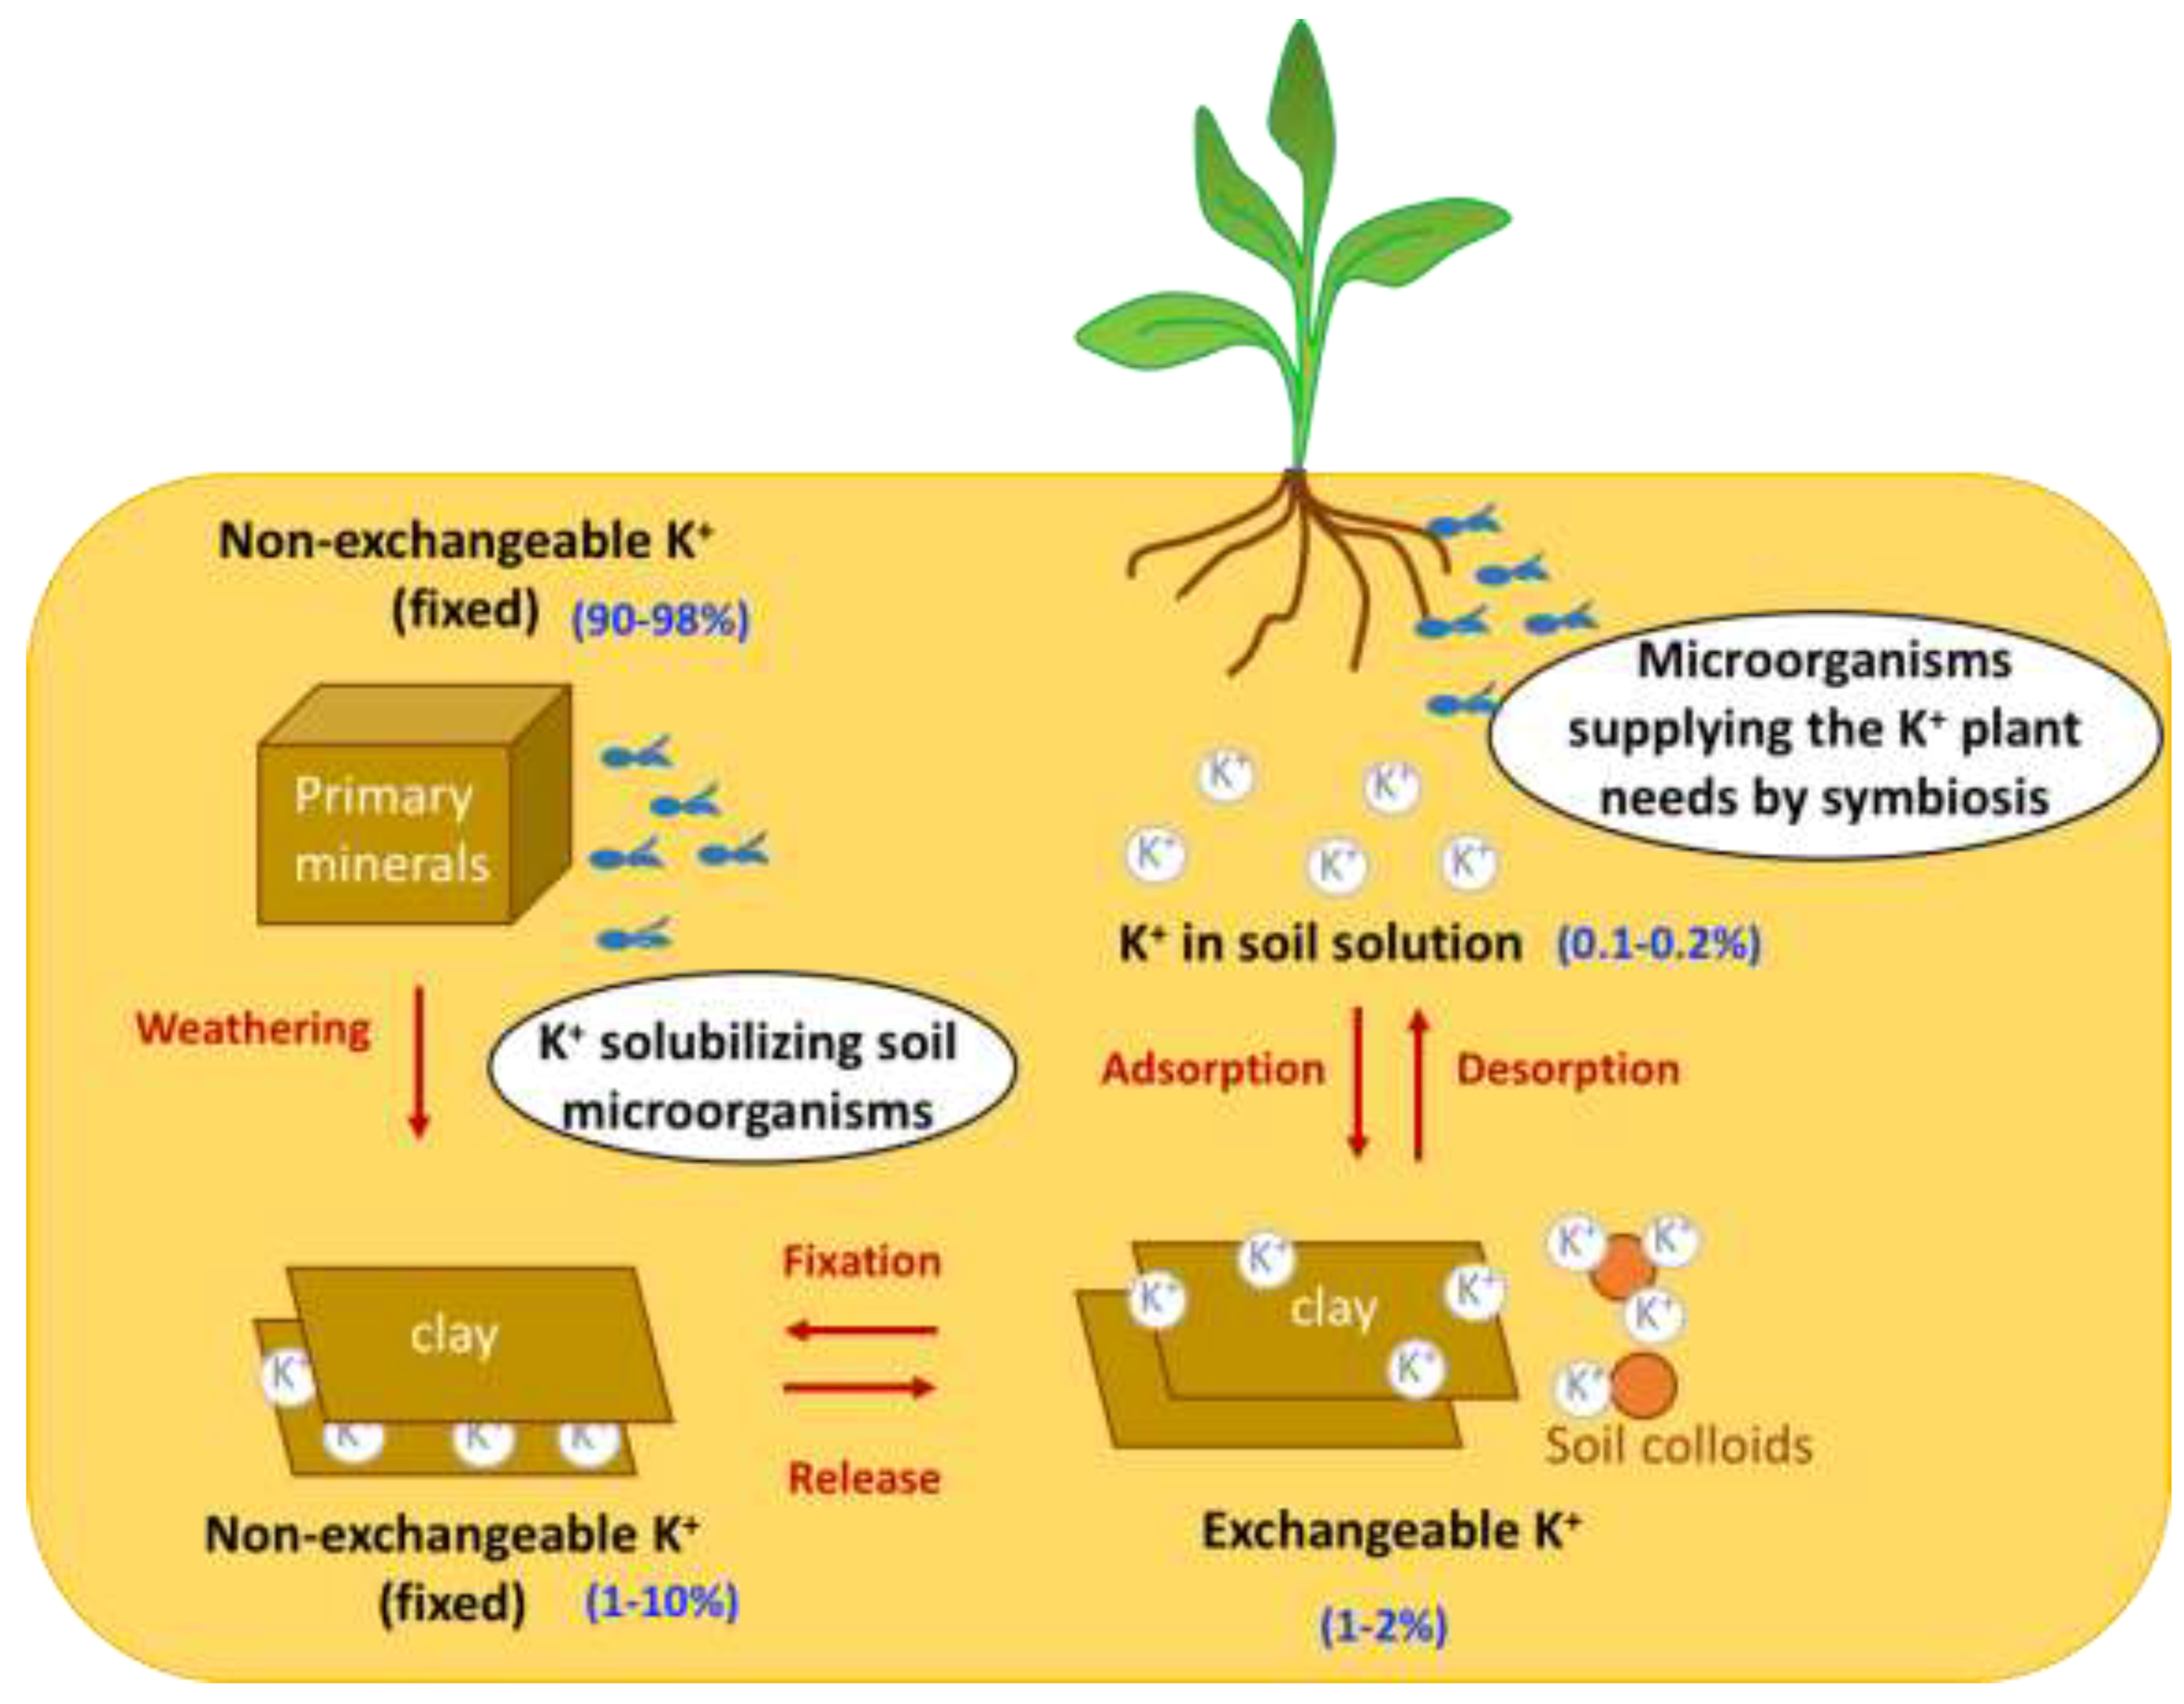 IJMS | Free Full-Text | The Role of Soil Fungi in K+ Plant Nutrition